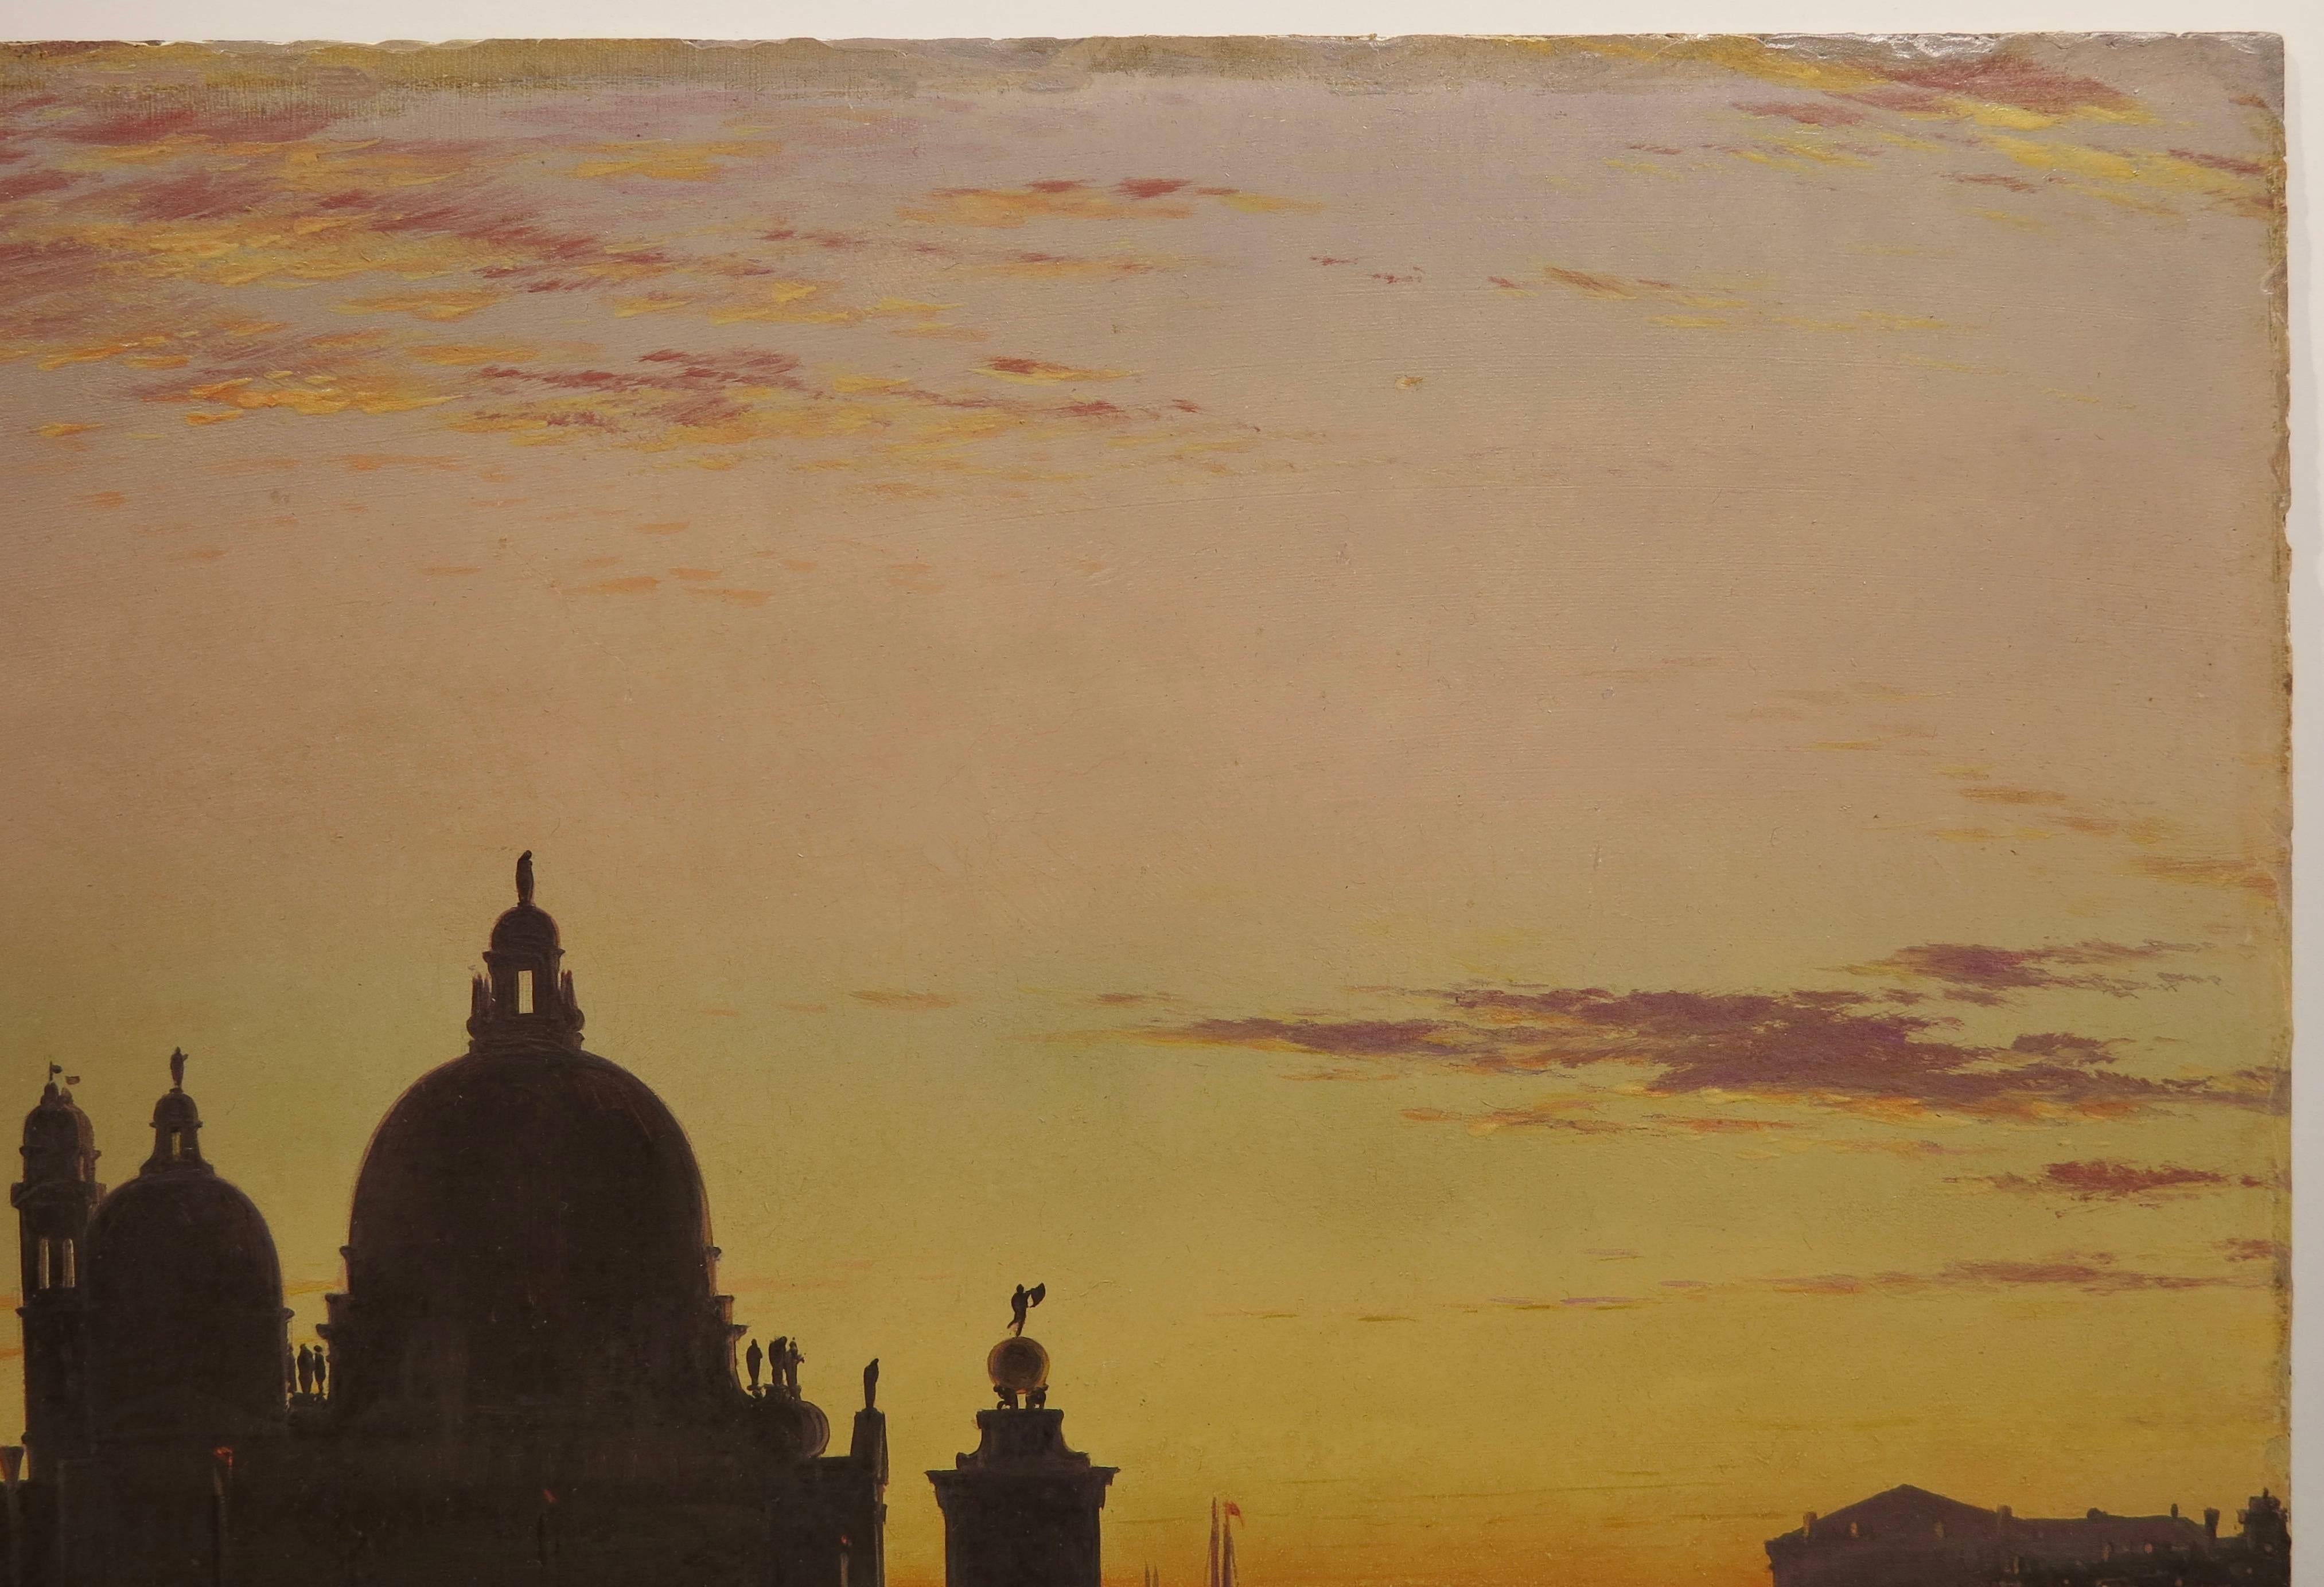 Edward William Cooke (1811-1890).  Santa Maria della Salute at Sunset, Venice, 1852. Oil on paper mounted to artist board, 11 5/8 x 15 3/8 inches. Unframed. Signed and dated lower left. Dedicated to Rawdon Brown with inscription en verso. Excellent